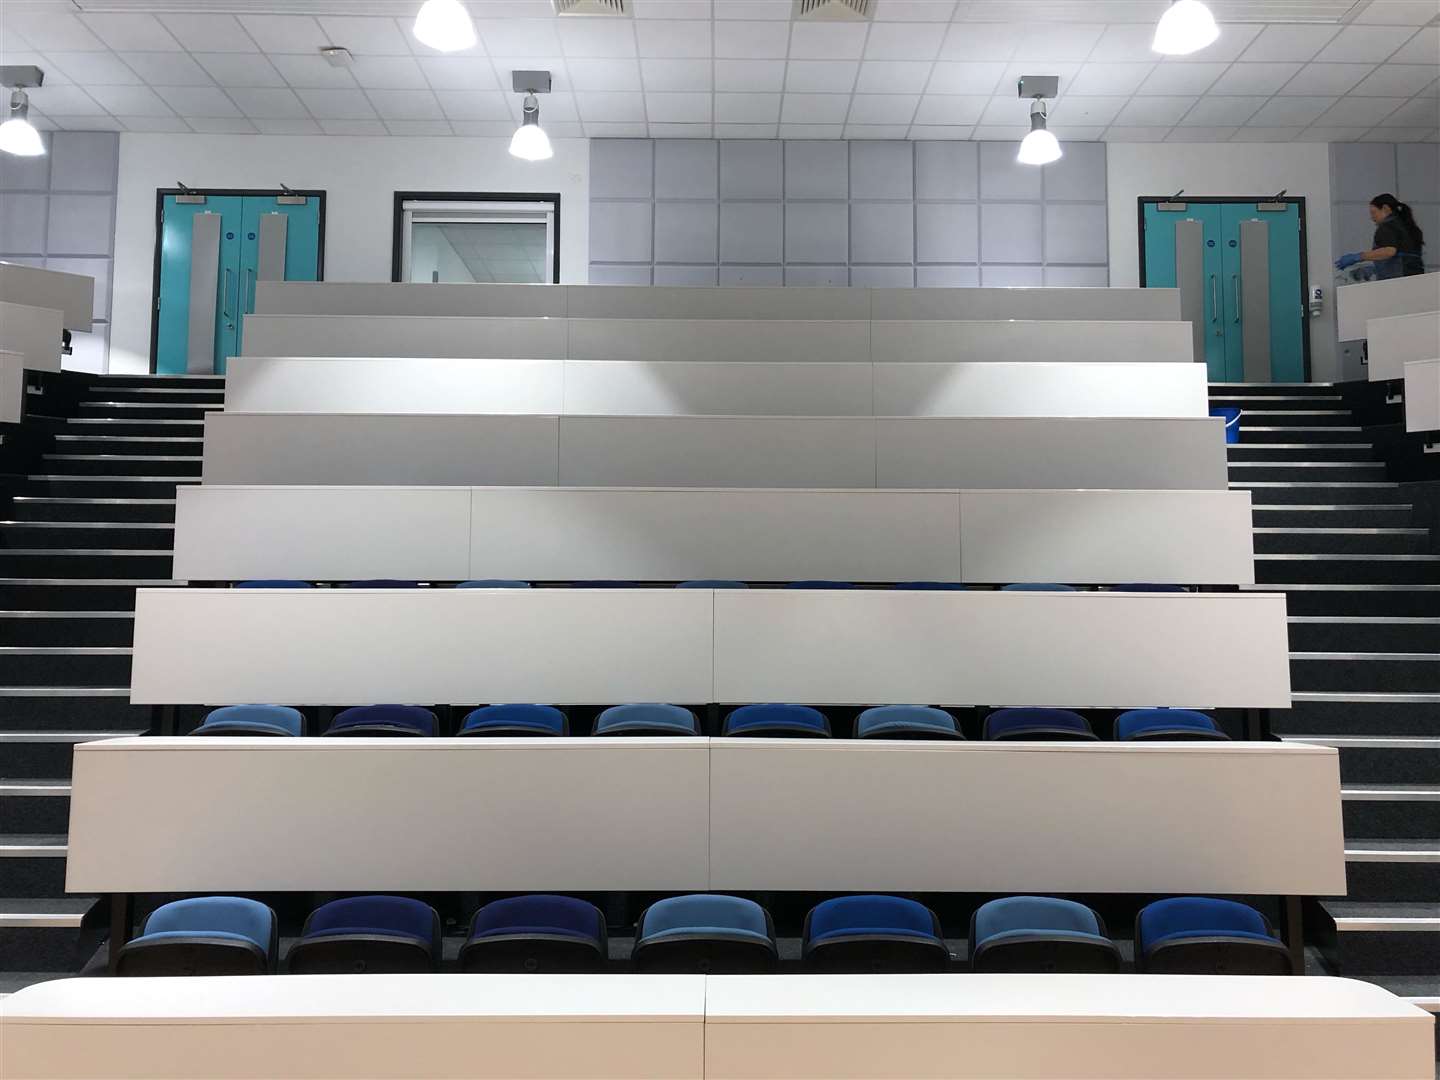 The school includes a lecture style hall for their students